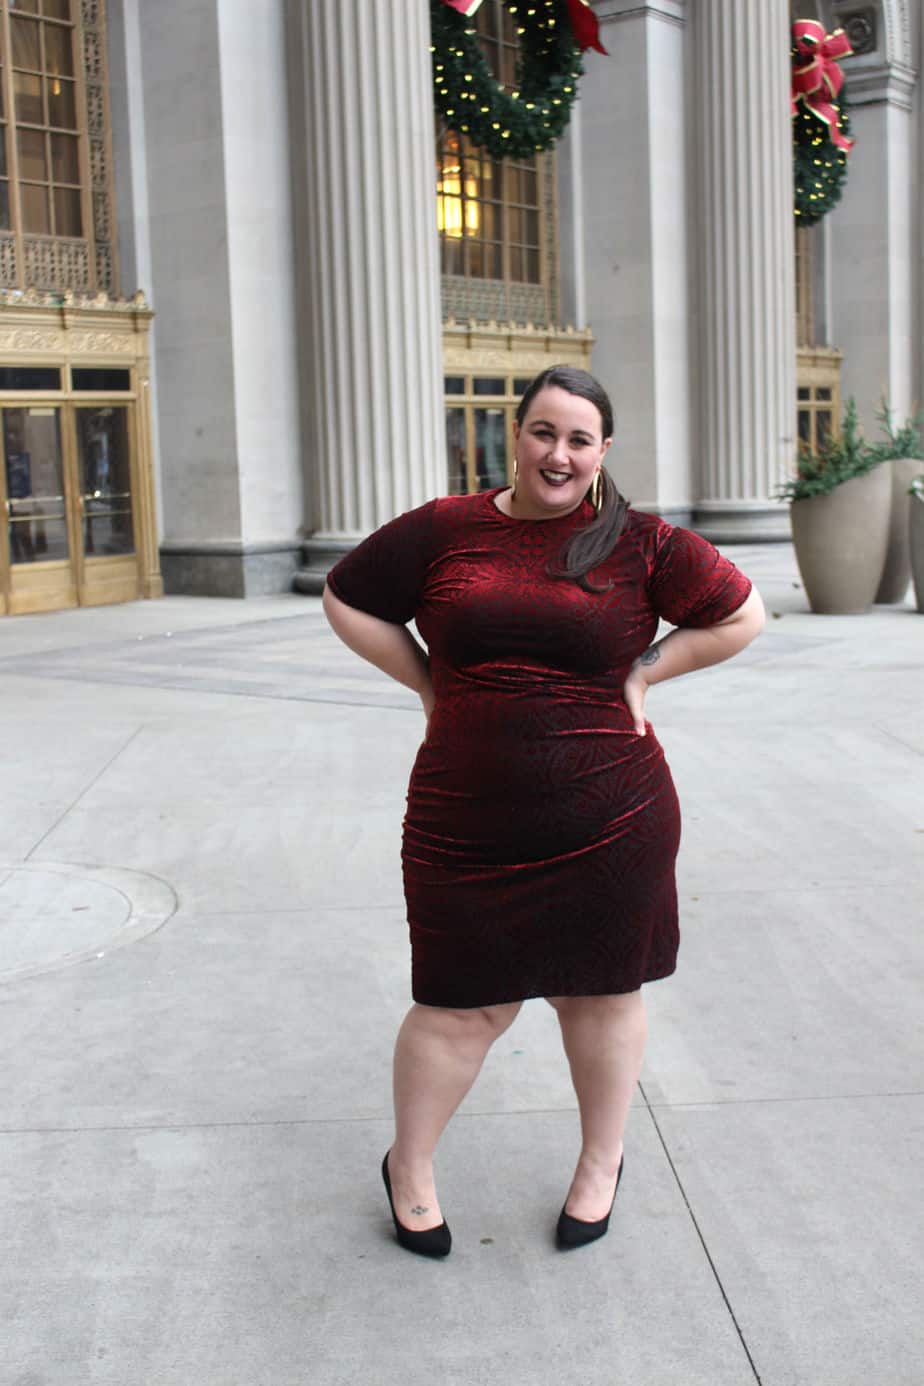 Plus Size Dress: What I Wore on Christmas Eve - Ready To Stare